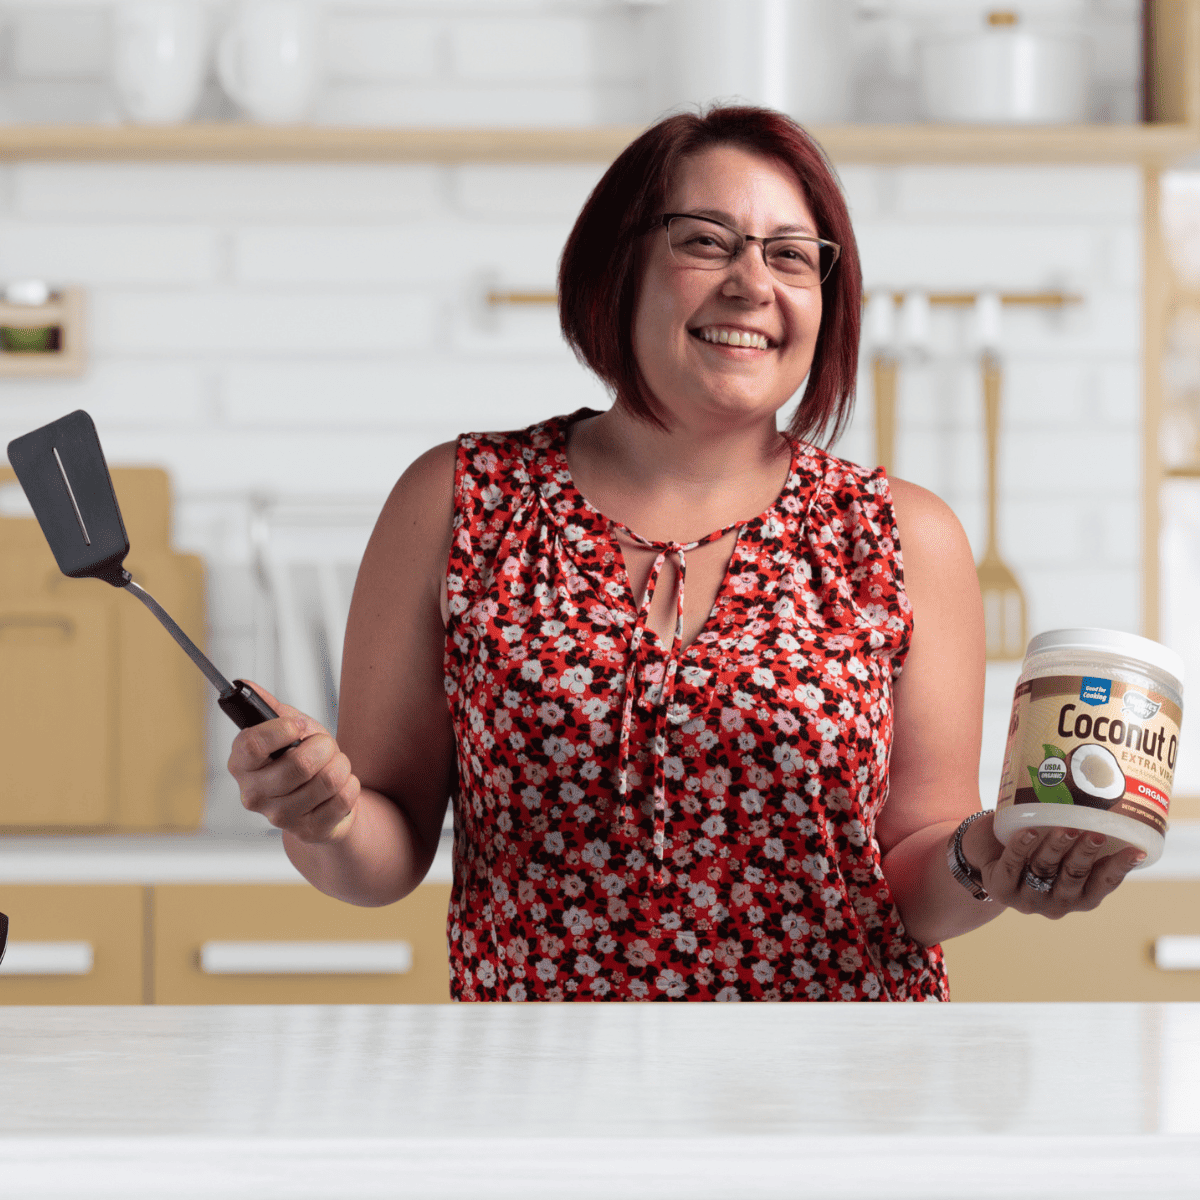 Heather Cooan in kitchen holding spatula and coconut oil wearing a red floral sleeveless shirt.